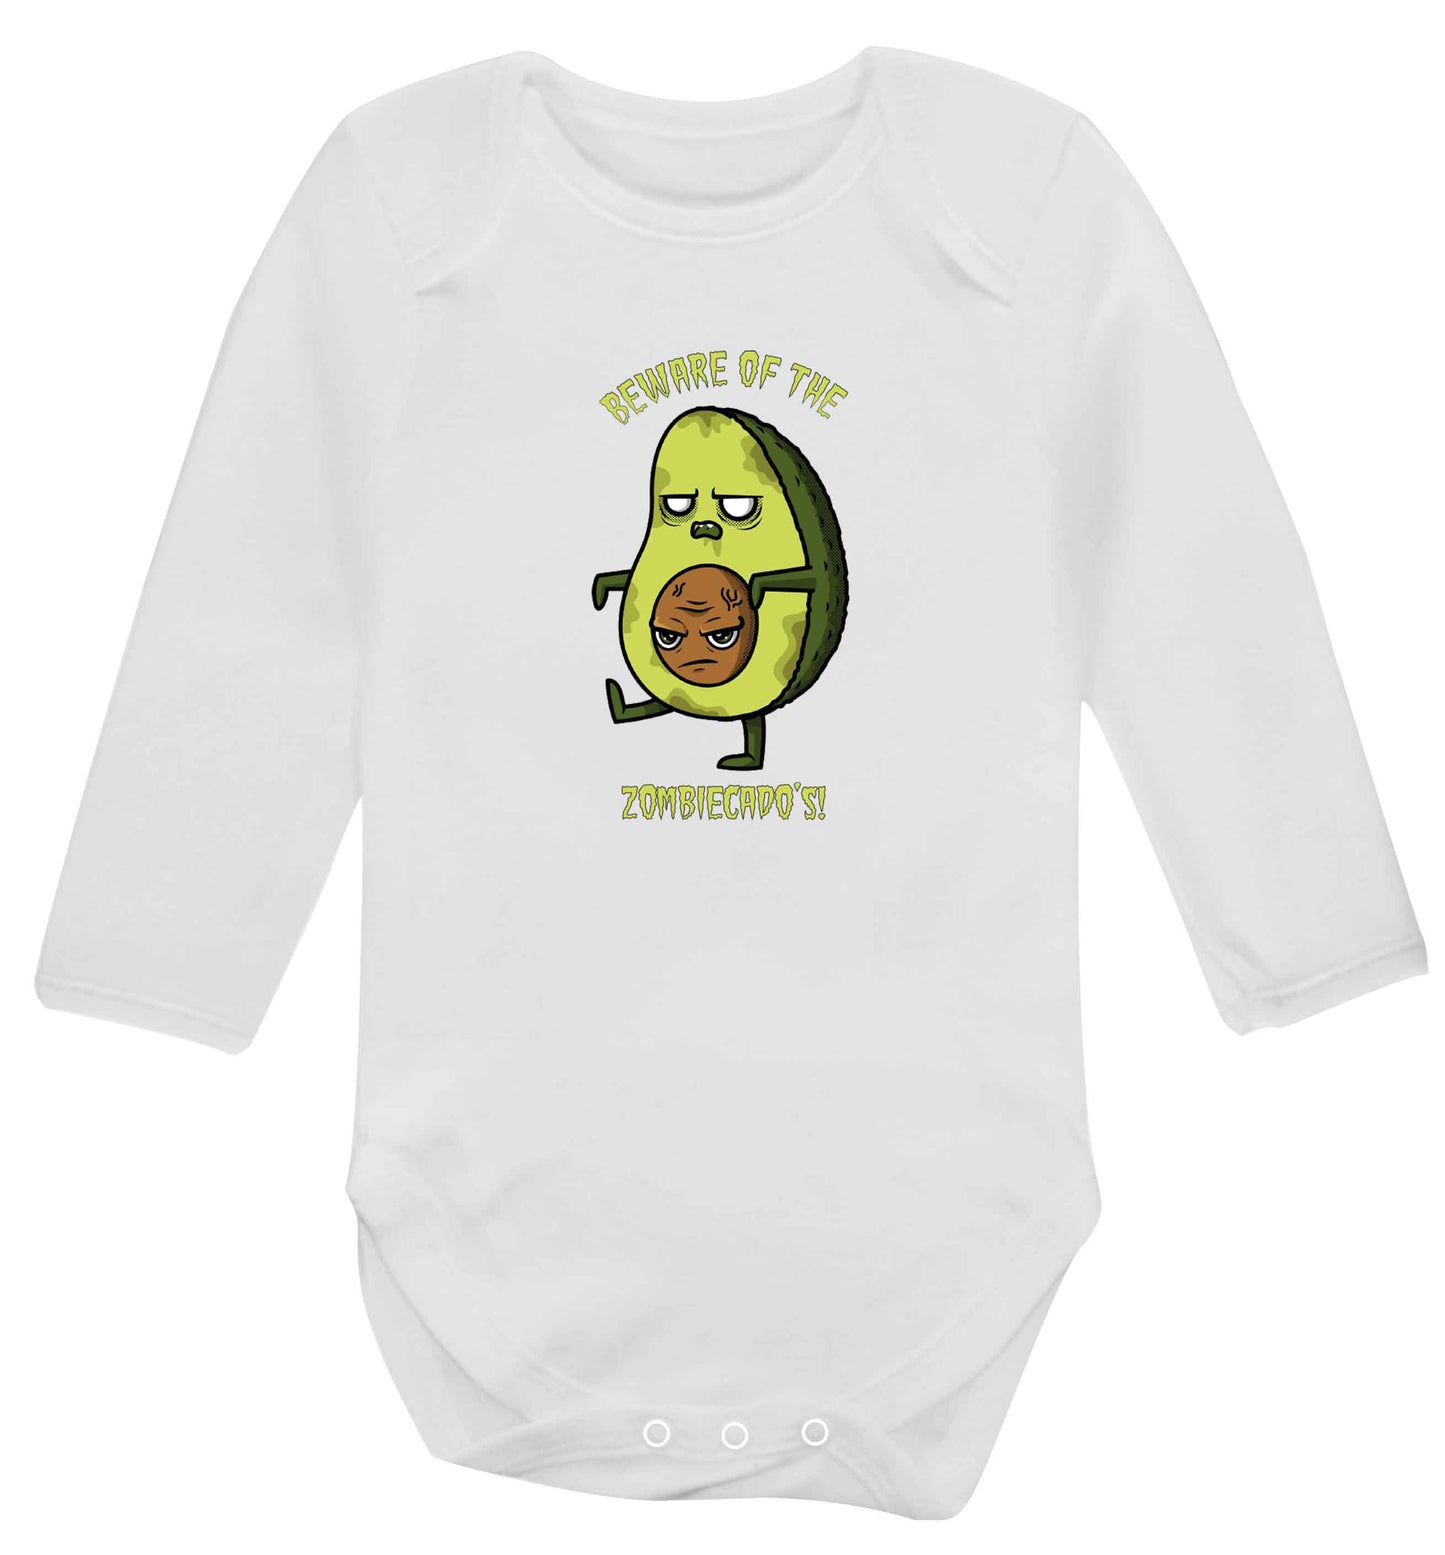 Beware of the zombicado's baby vest long sleeved white 6-12 months